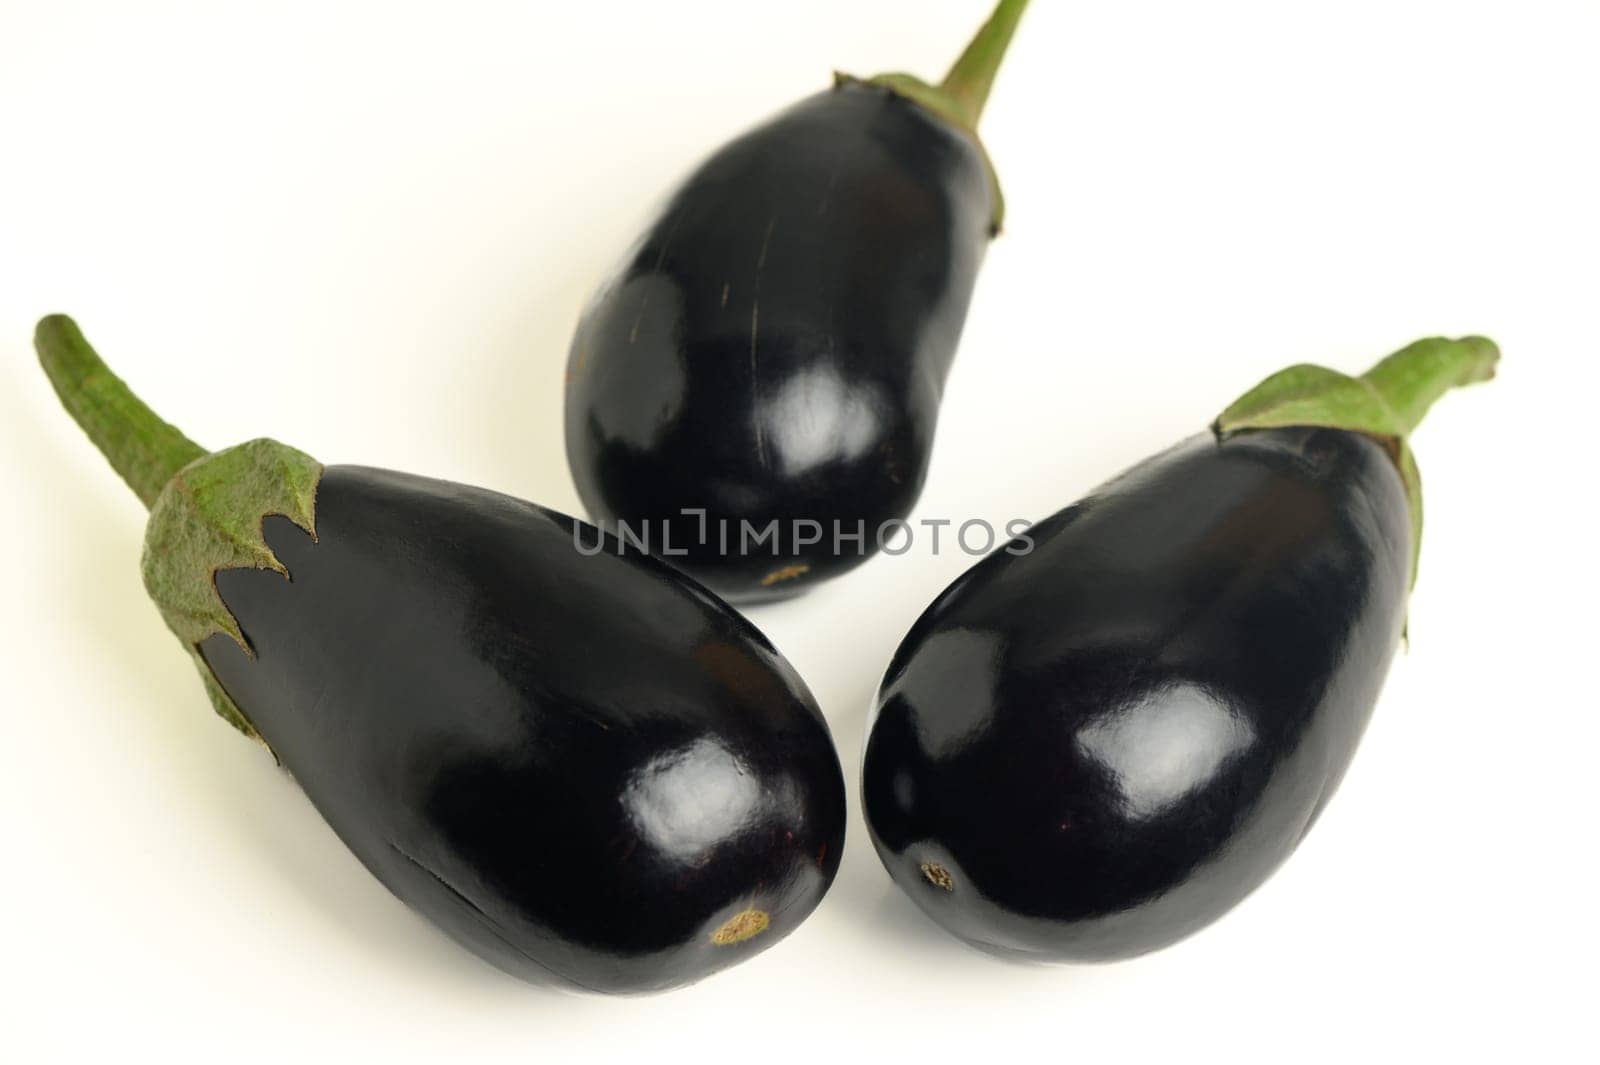 appetizing eggplants on a white background 1 by Mixa74